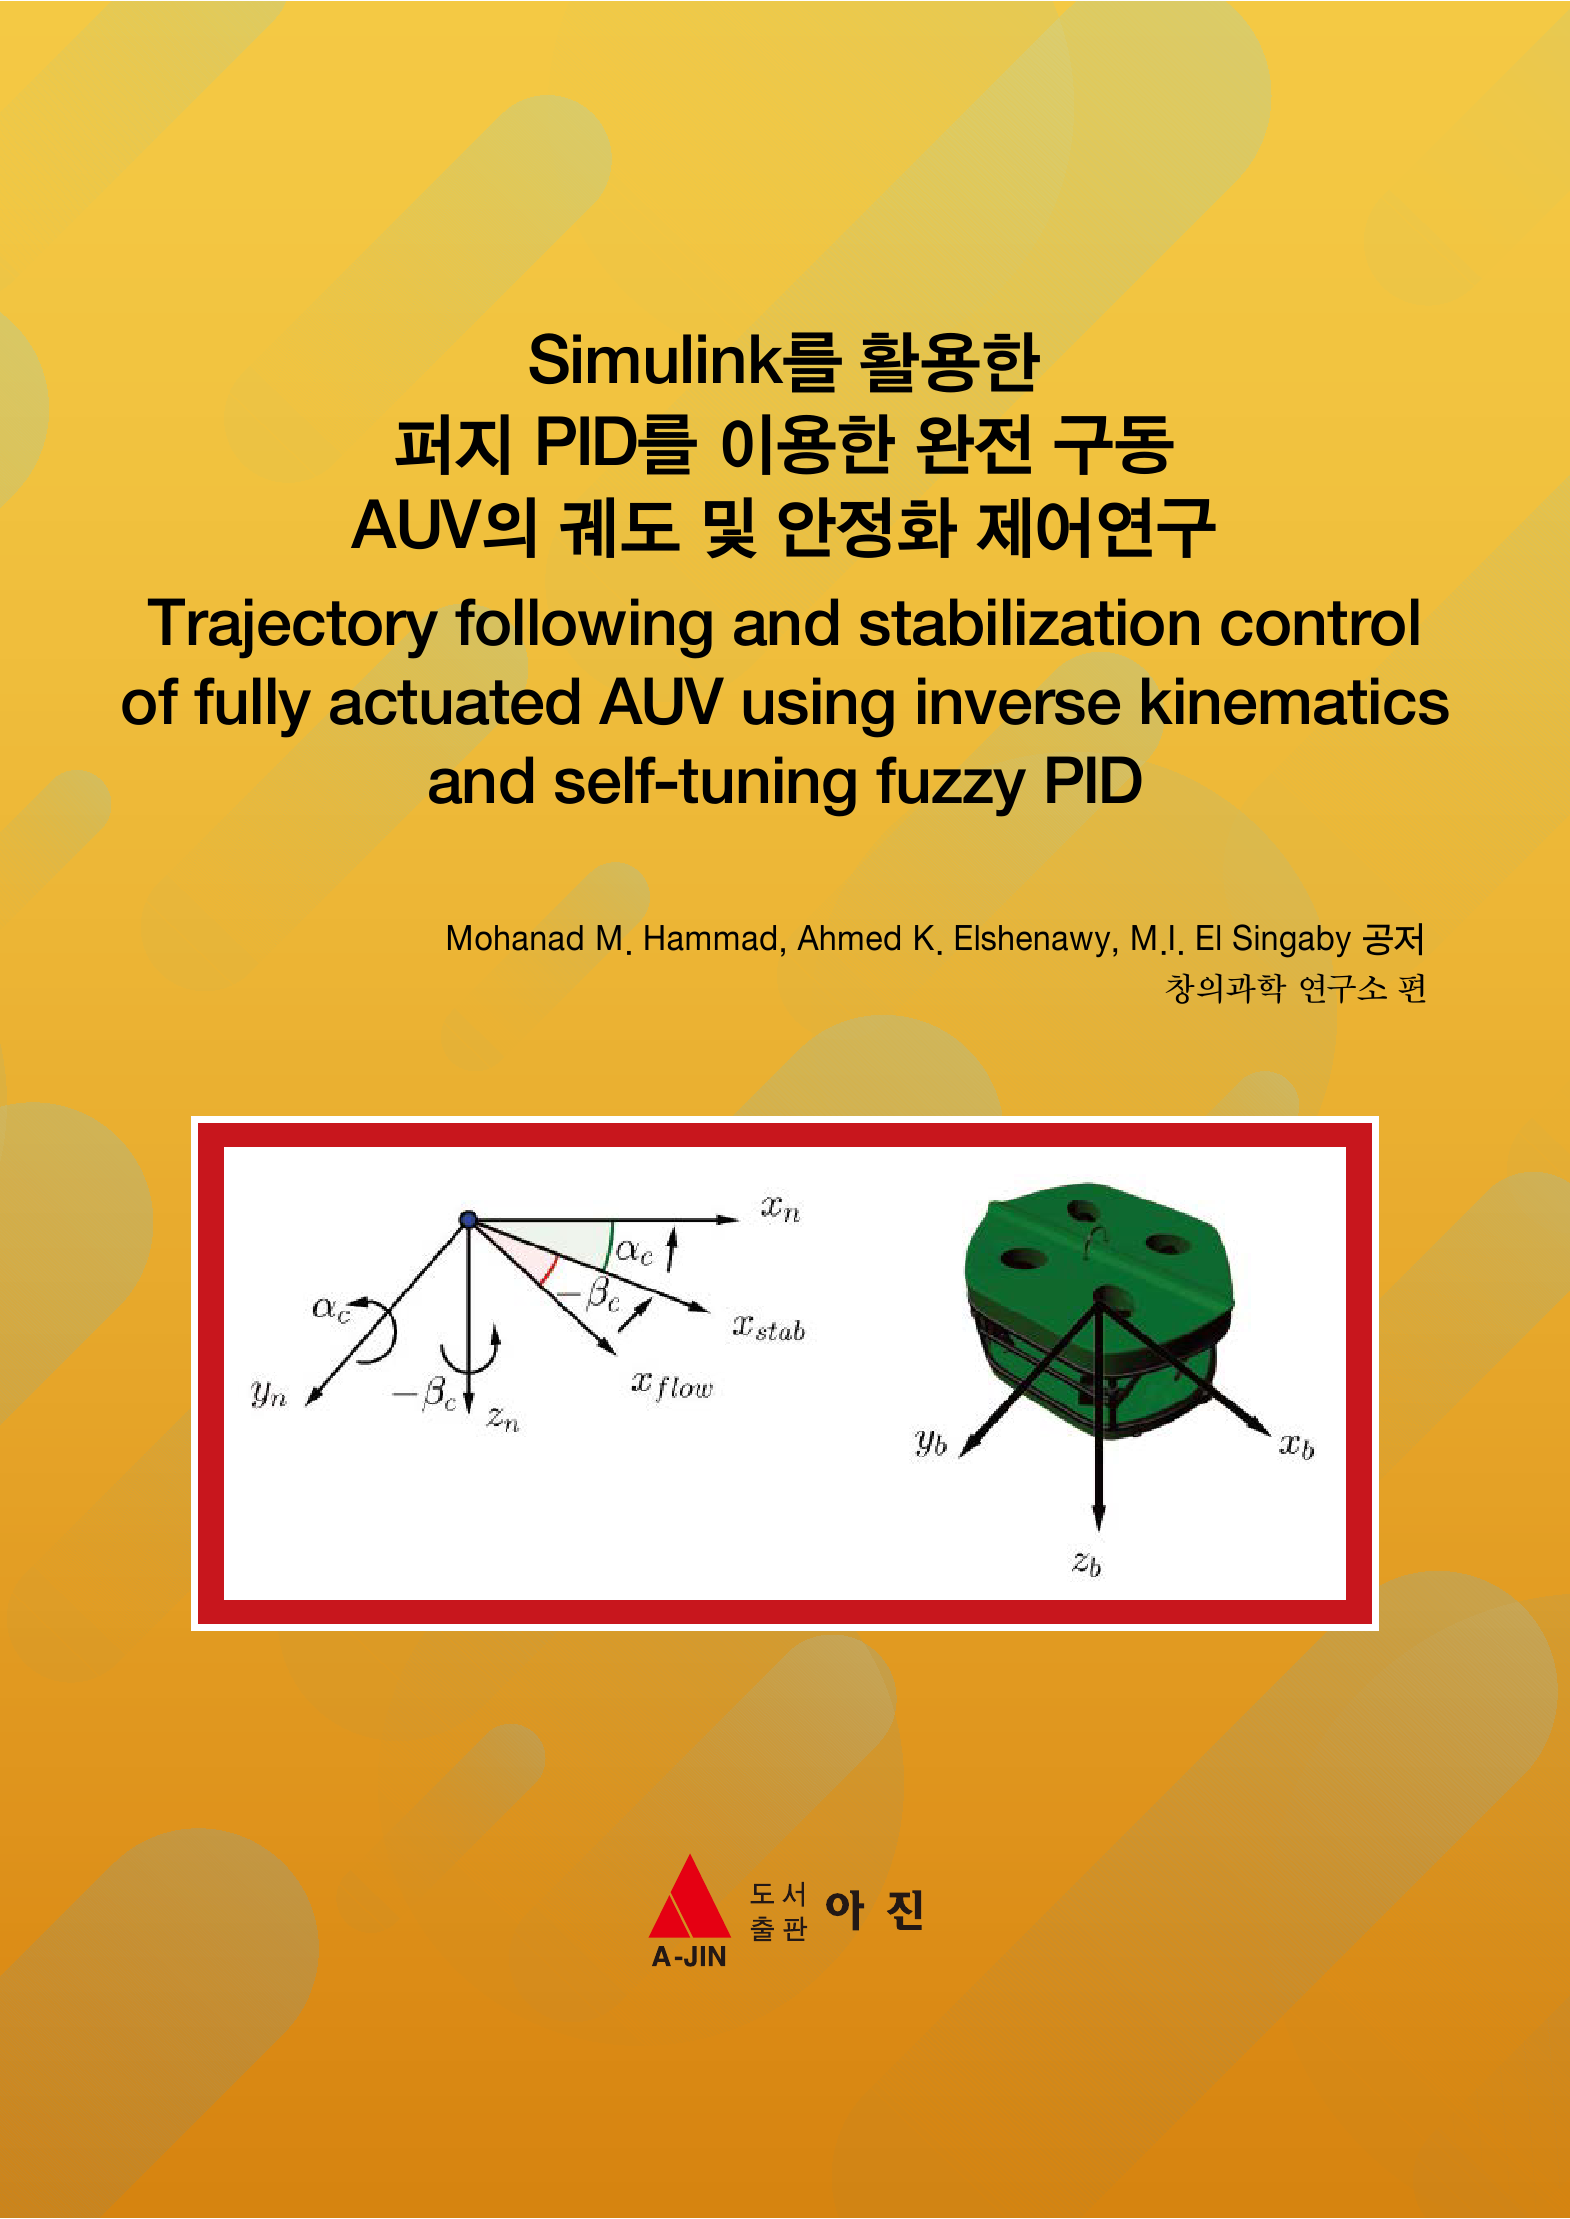 Simulink를 활용한 퍼지 PID를 이용한 완전 구동 AUV의 궤도 및 안정화 제어연구(Trajectory following and stabilization control of fully actuated AUV using inverse kinematics and self-tuning fuzzy PID)